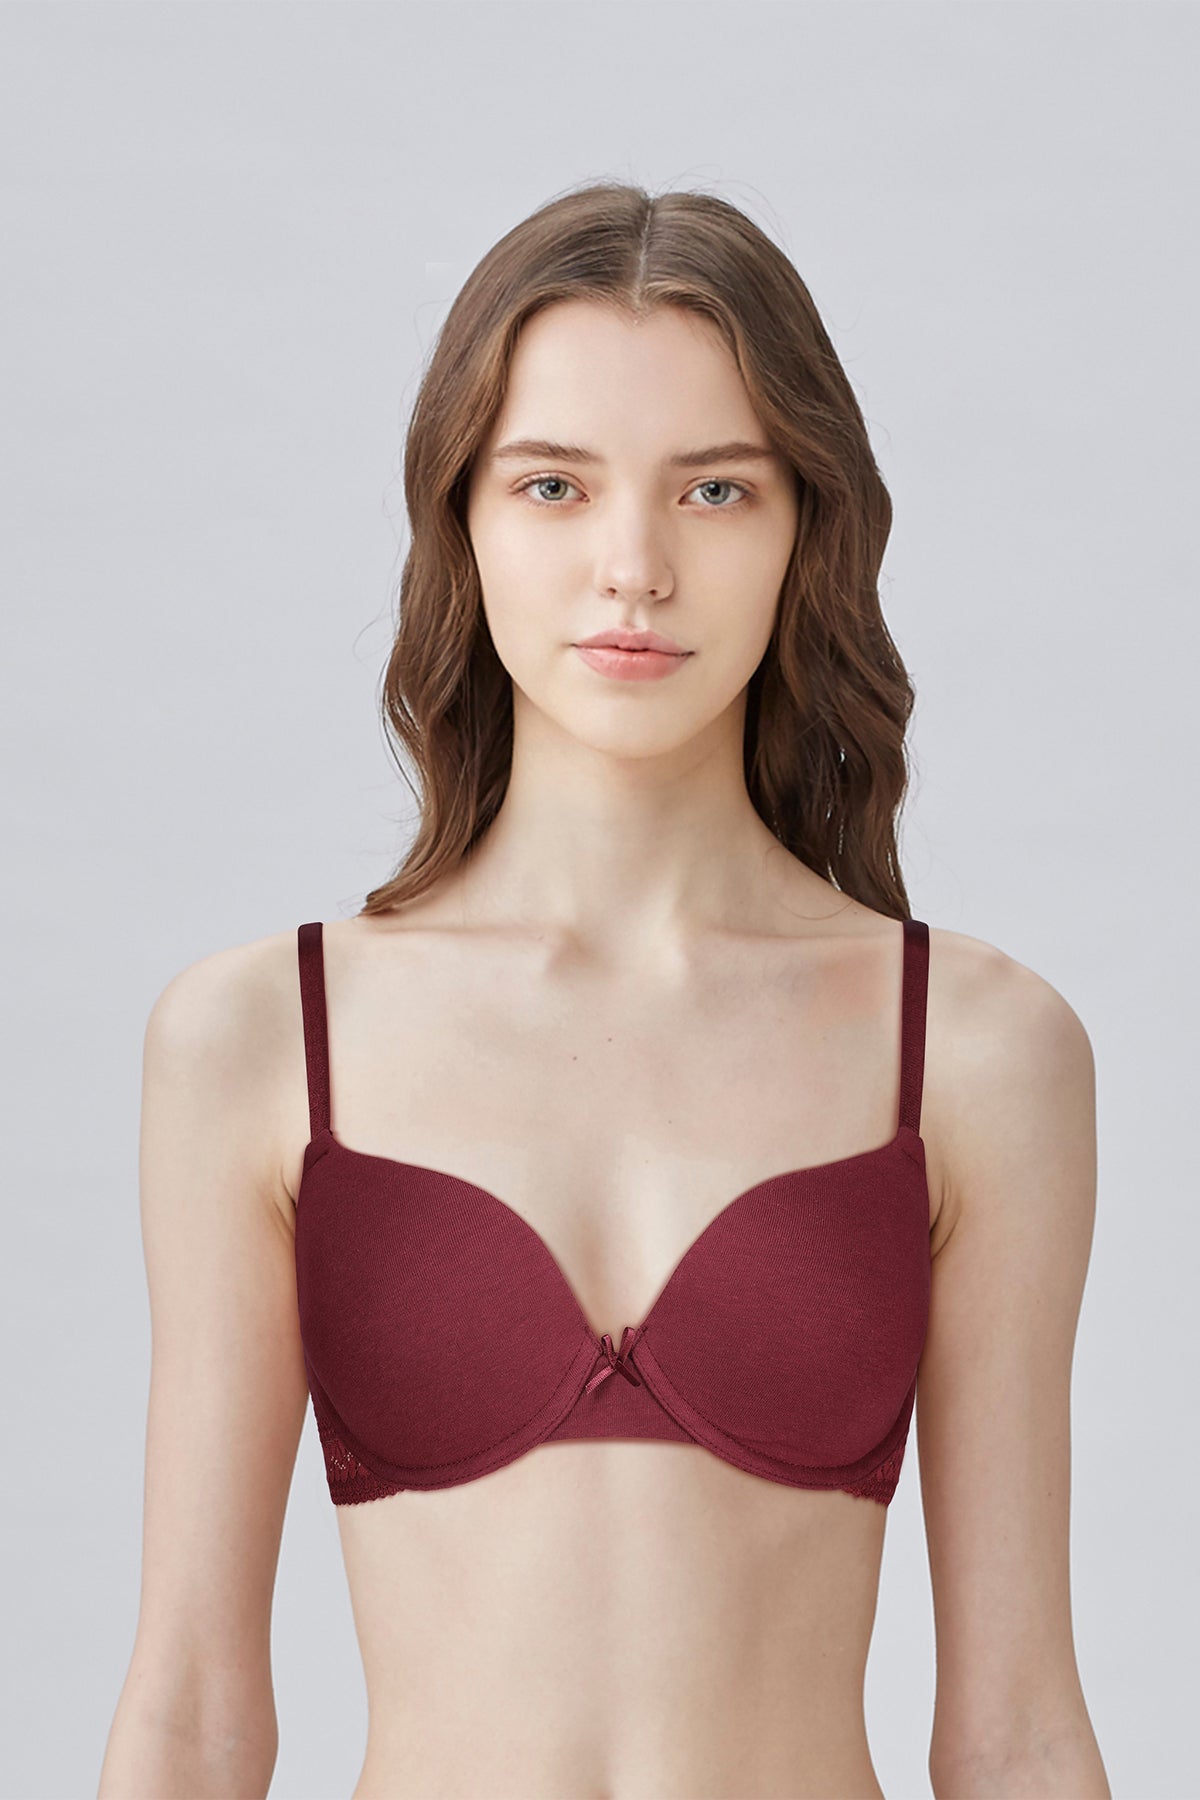 Buy online Multi Colored Cotton Blend Regular Bra from lingerie for Women  by Ladyland for ₹499 at 38% off